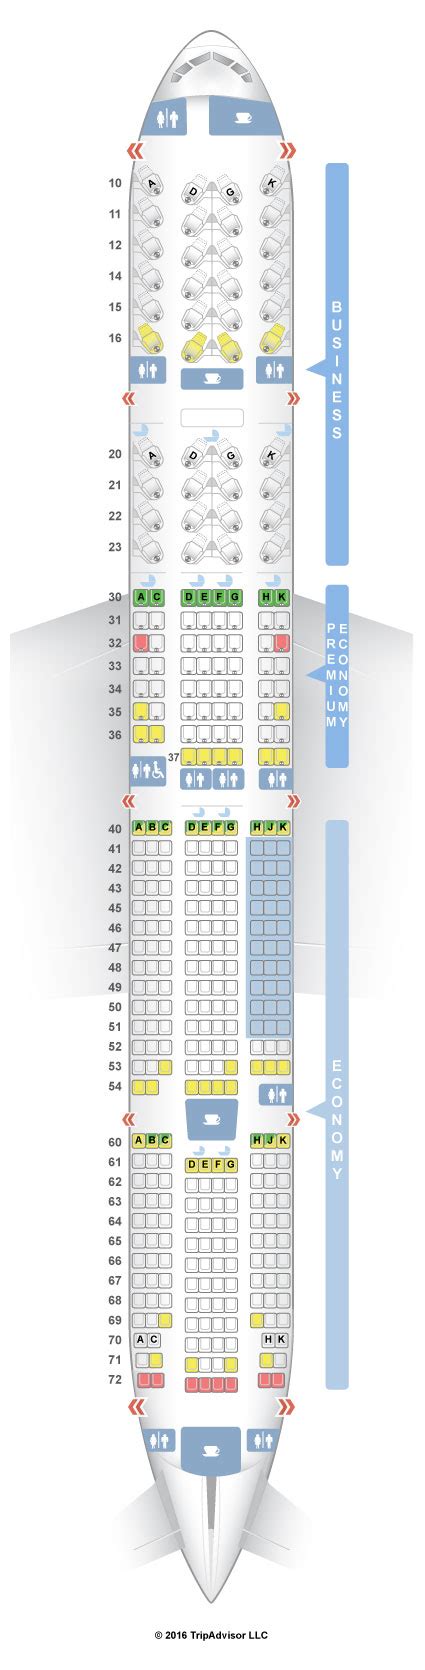 Seating Plan Boeing 777 300er Cathay Pacific